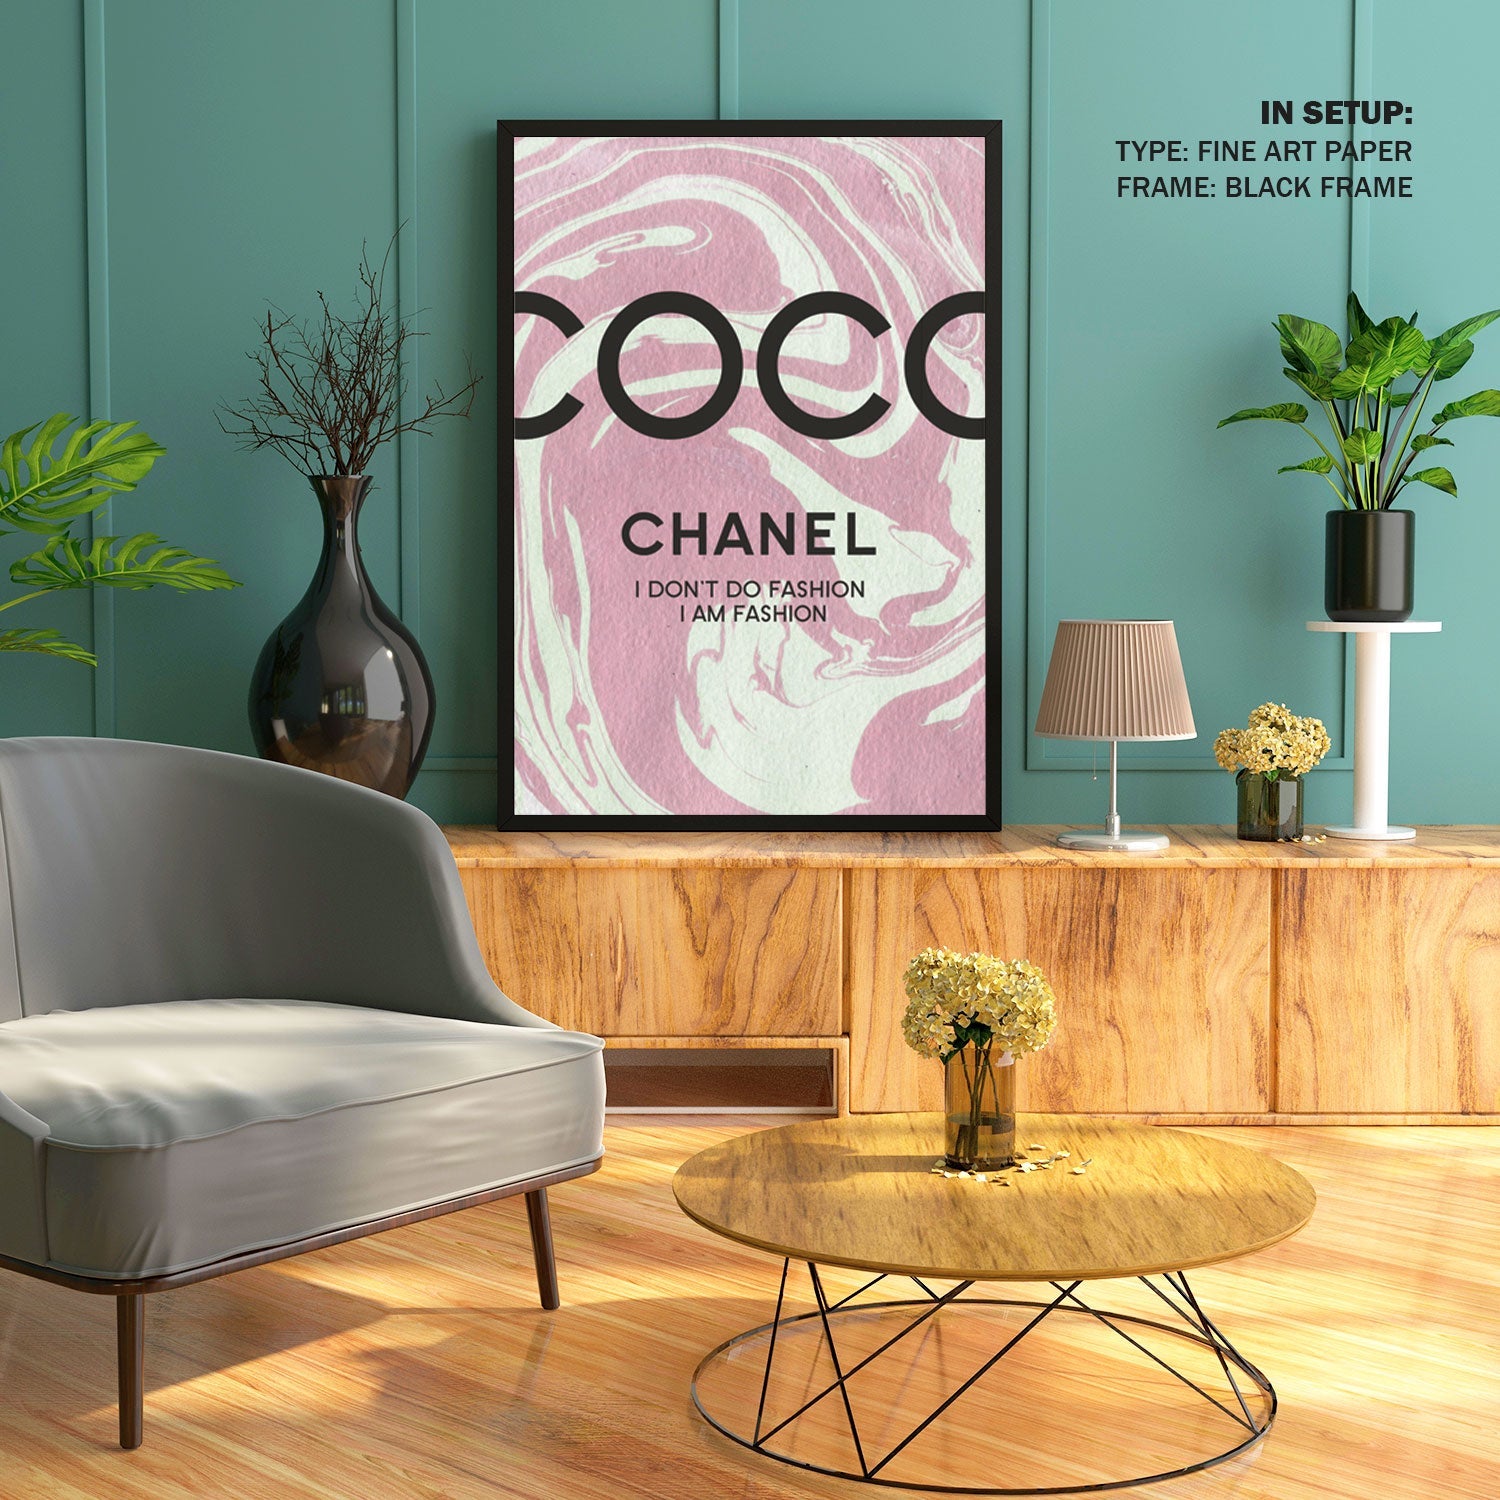 Coco Chanel Poster II: Buy Premium Framed Fashion Posters Online